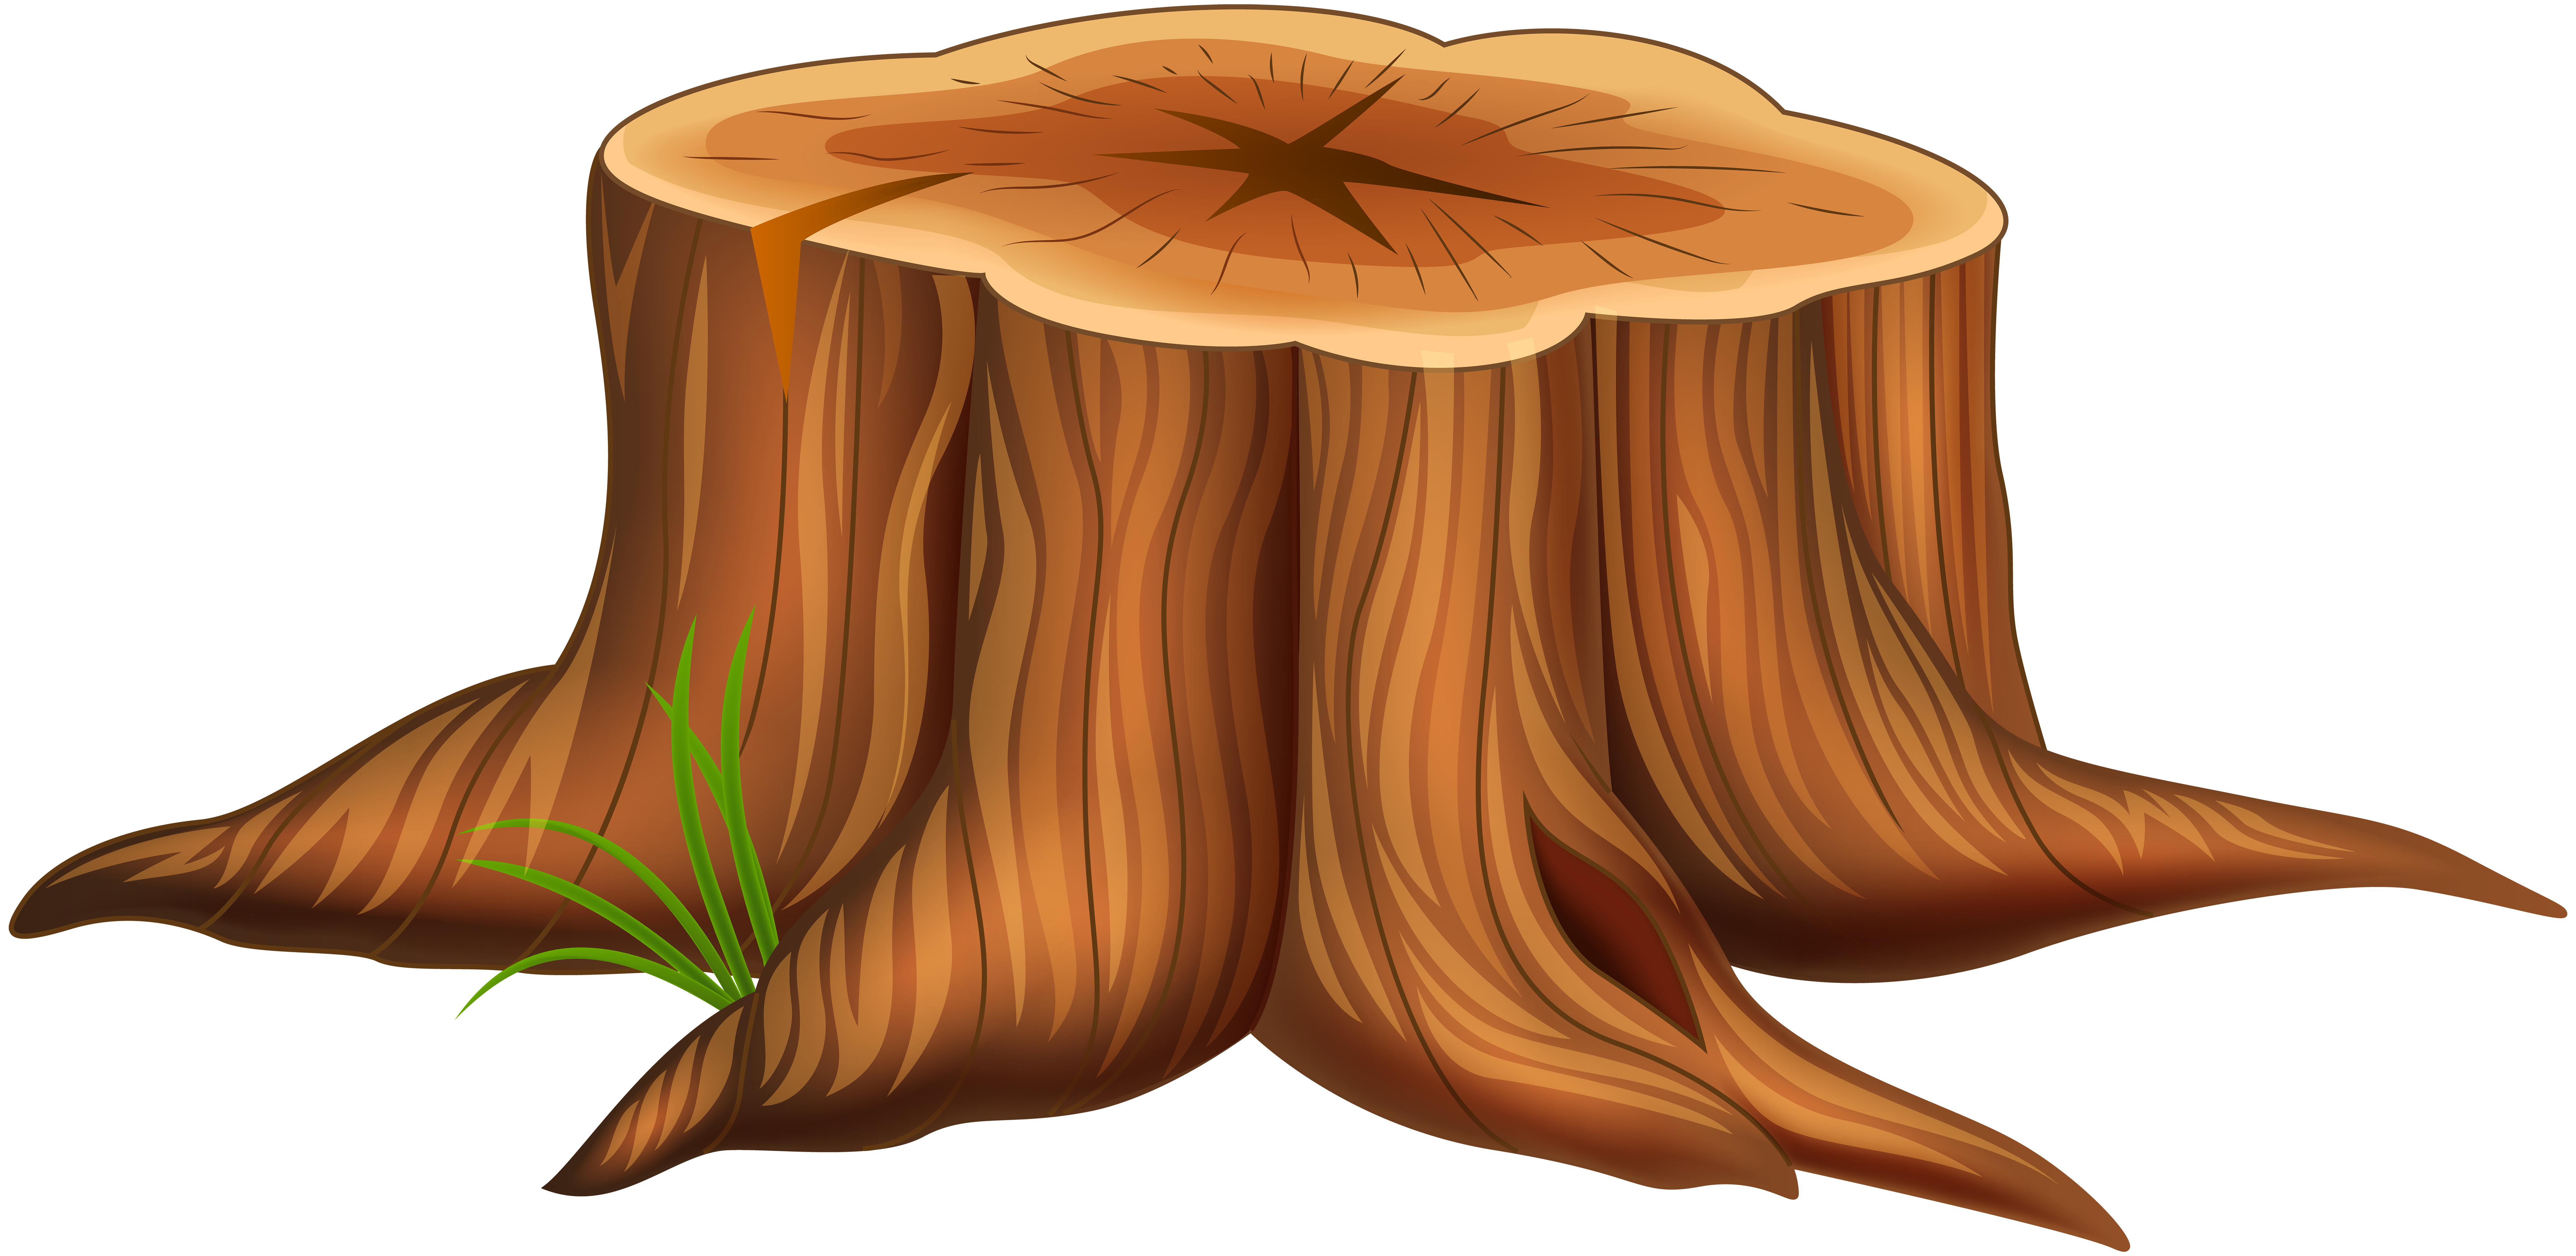 clipart home tree